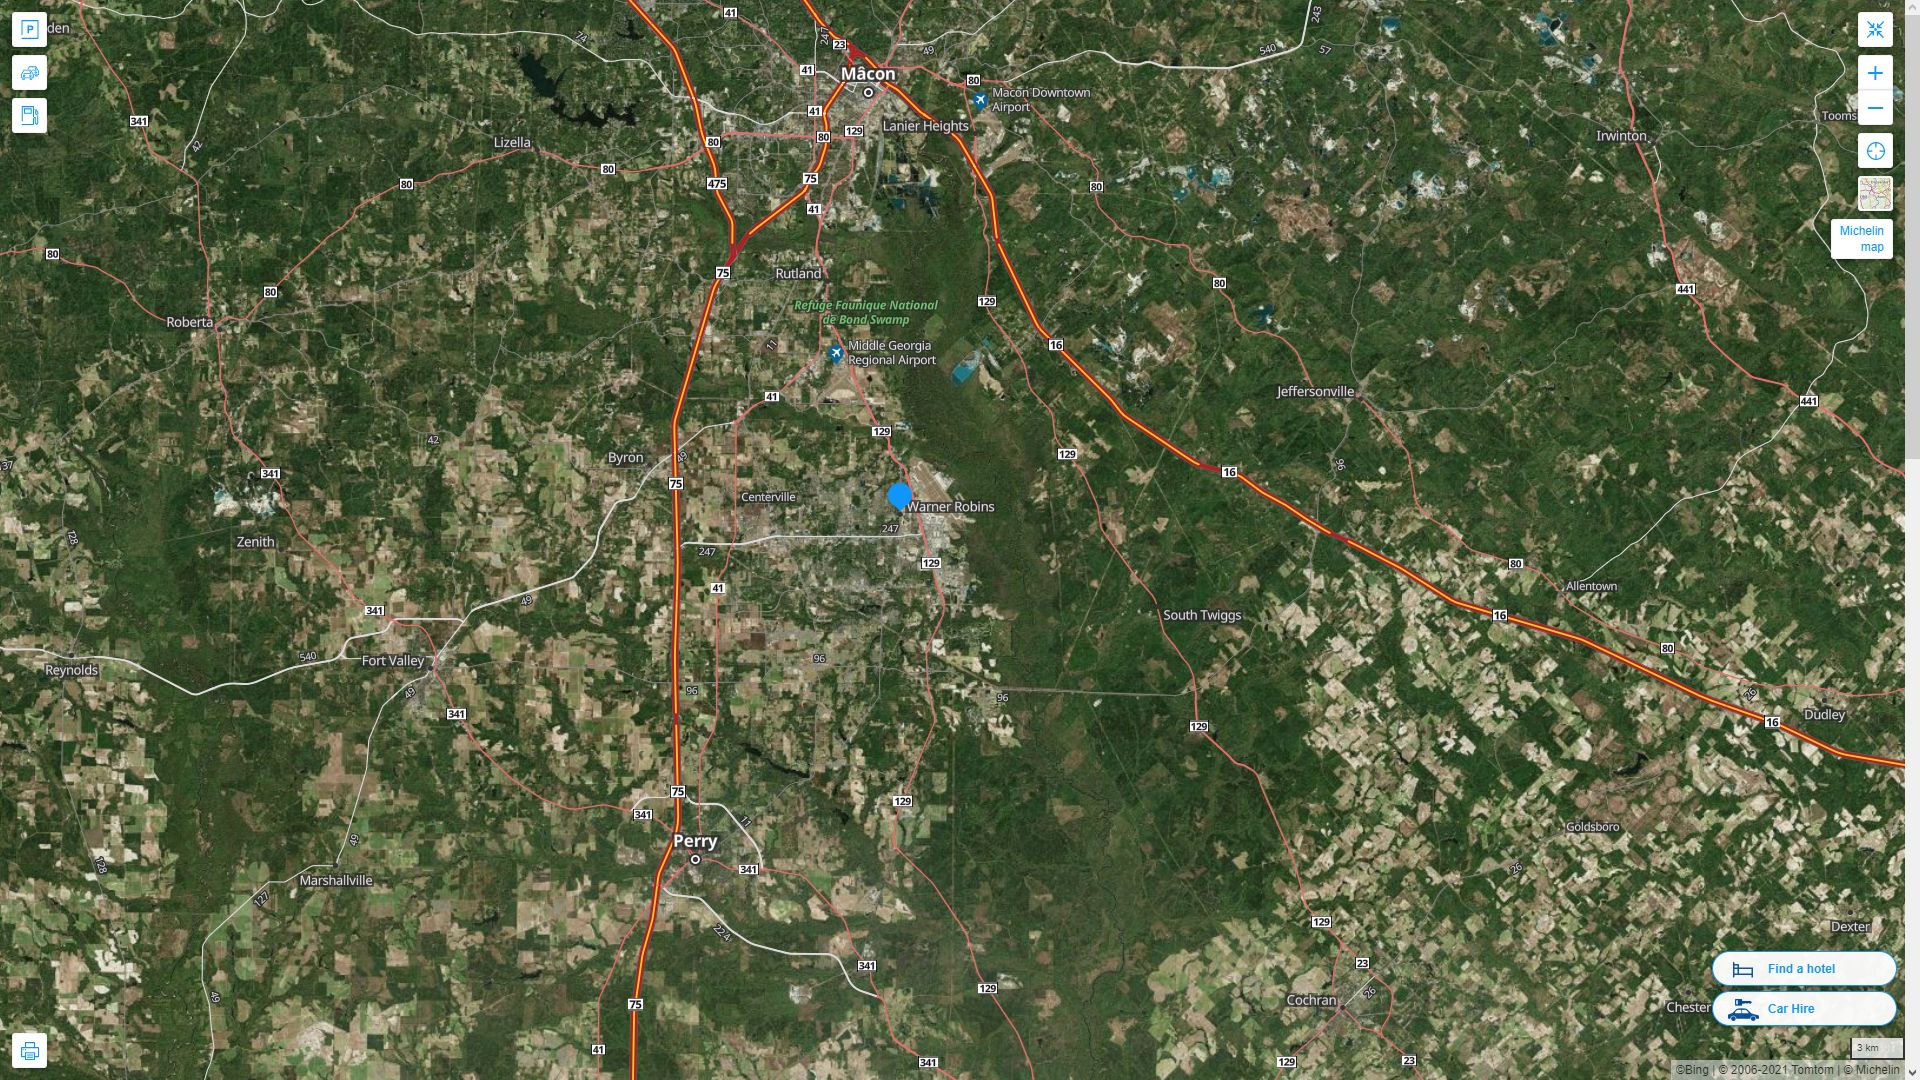 Warner Robins Georgia Highway and Road Map with Satellite View